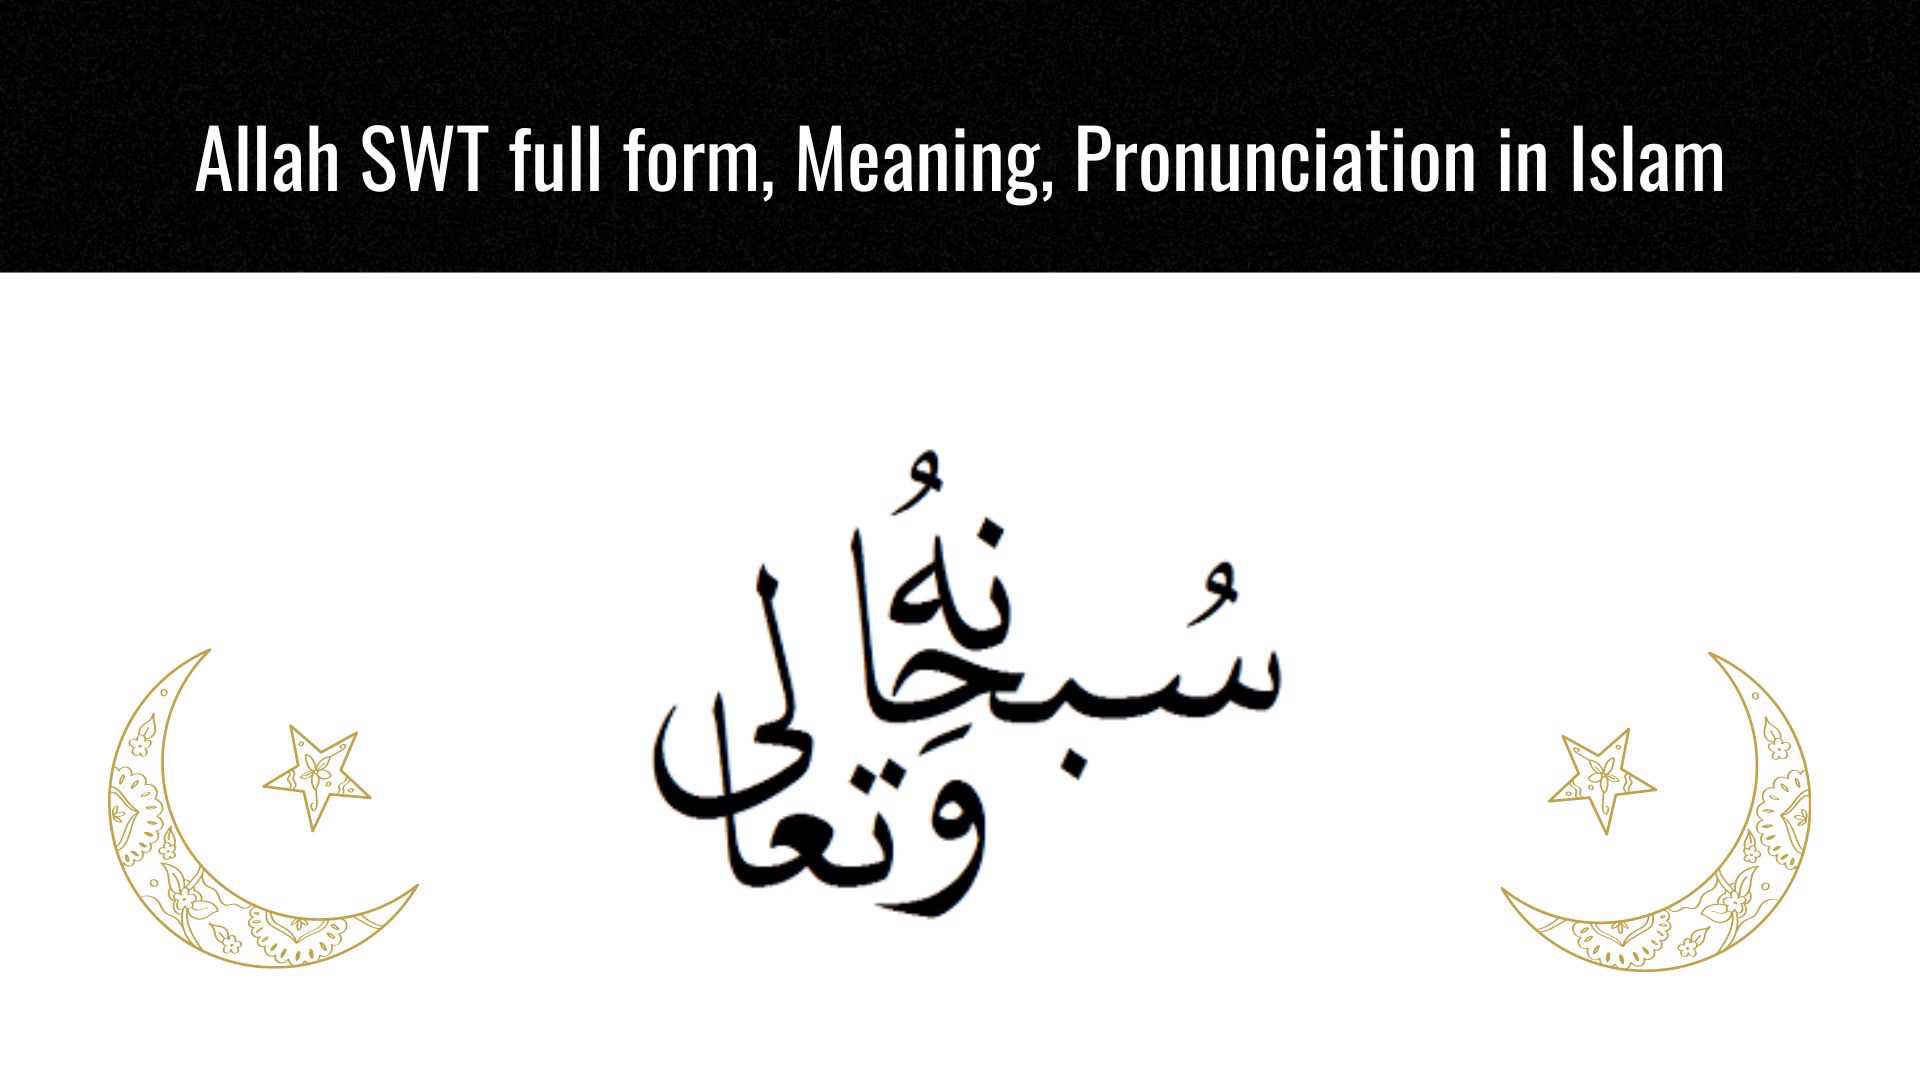 Allah SWT full form in Islam, Meaning, Pronunciation